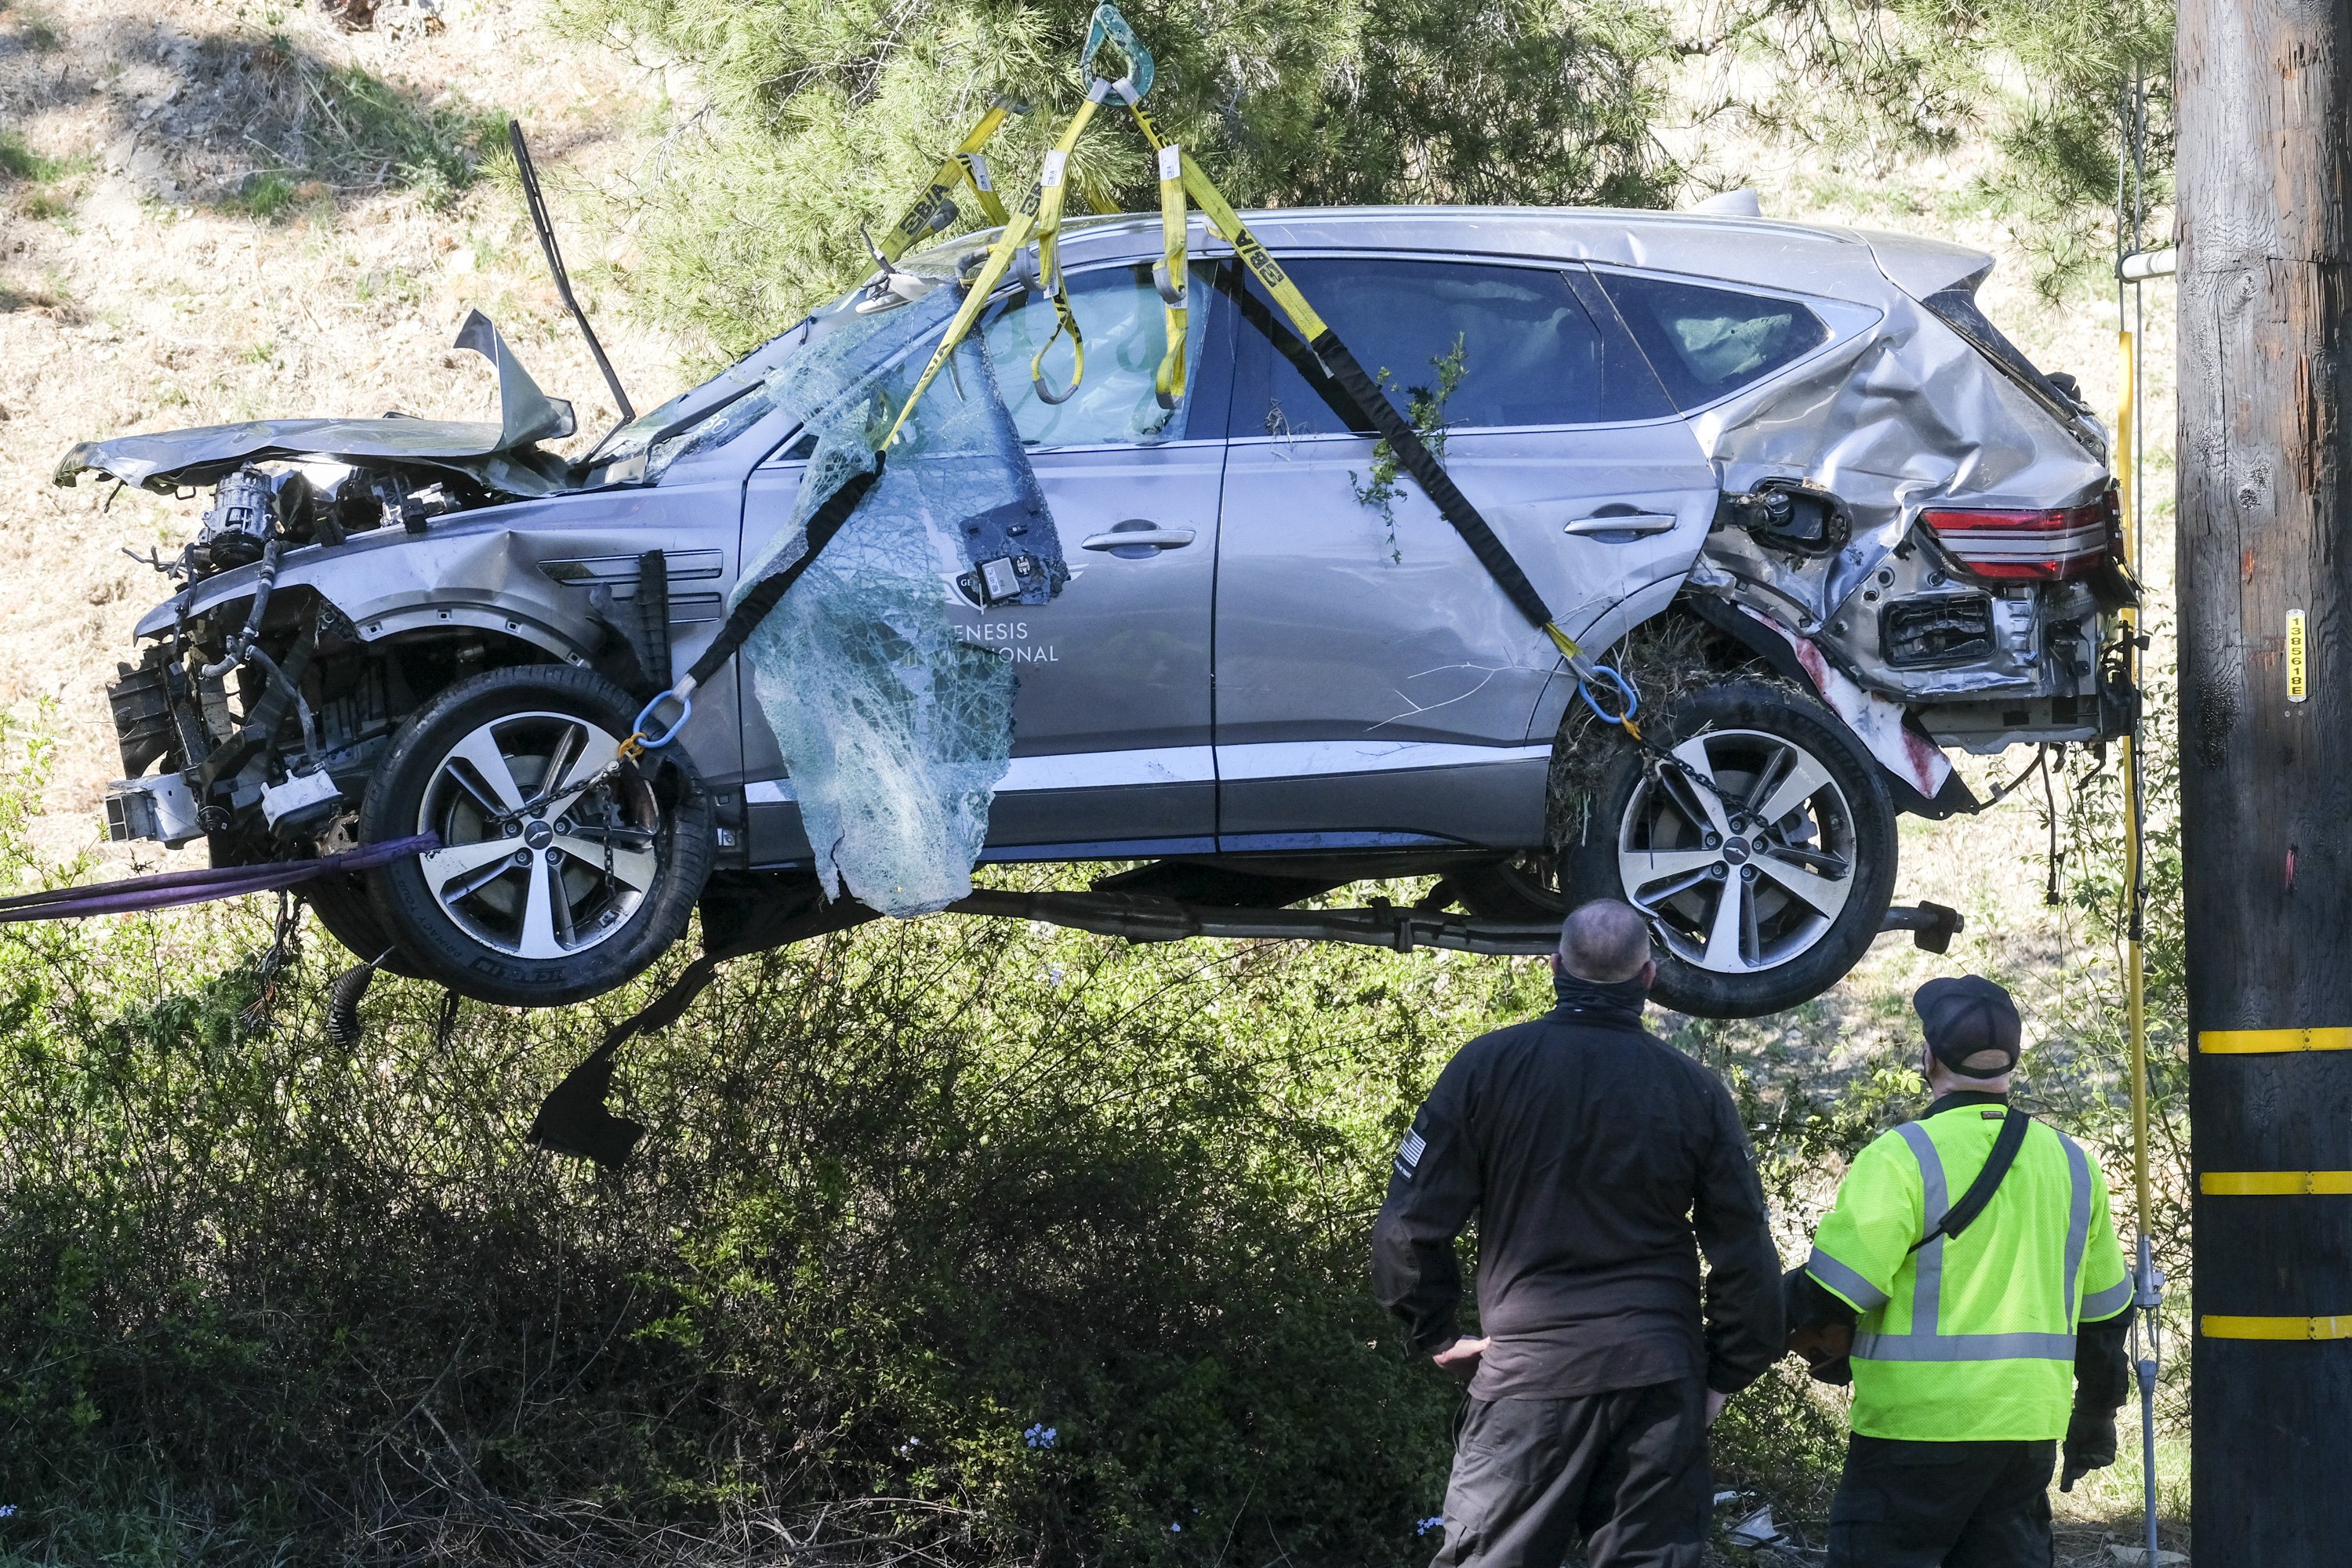 Sheriff in Los Angeles will announce cause of Tiger Woods’ accident